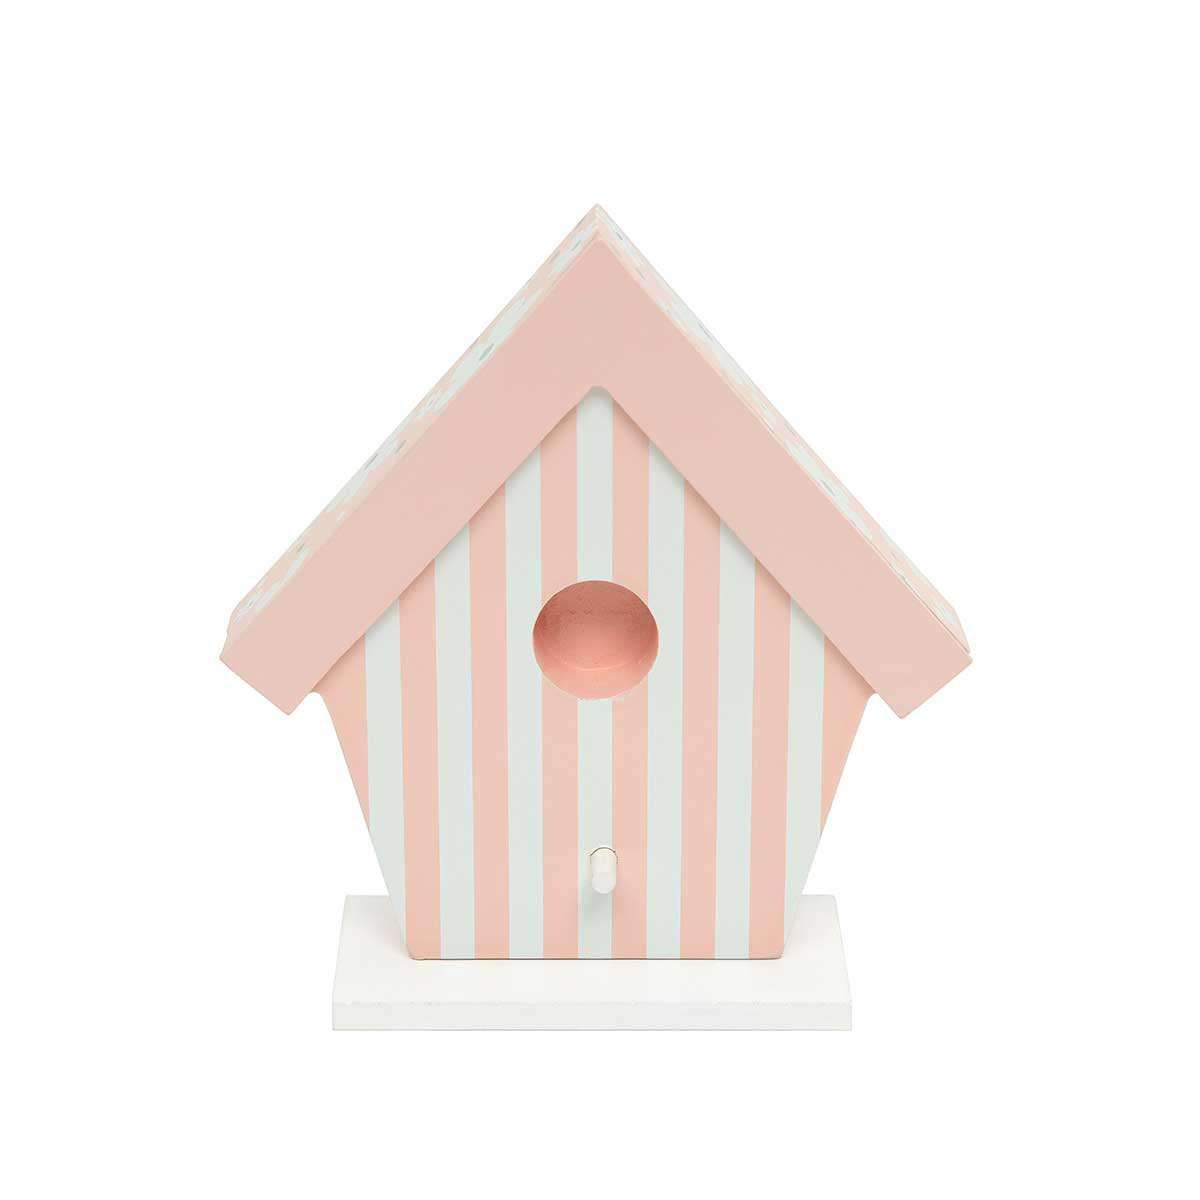 WHOOPSIE WOOD BIRDHOUSE SIT-A-BOUT PINK/WHITE STRIPE